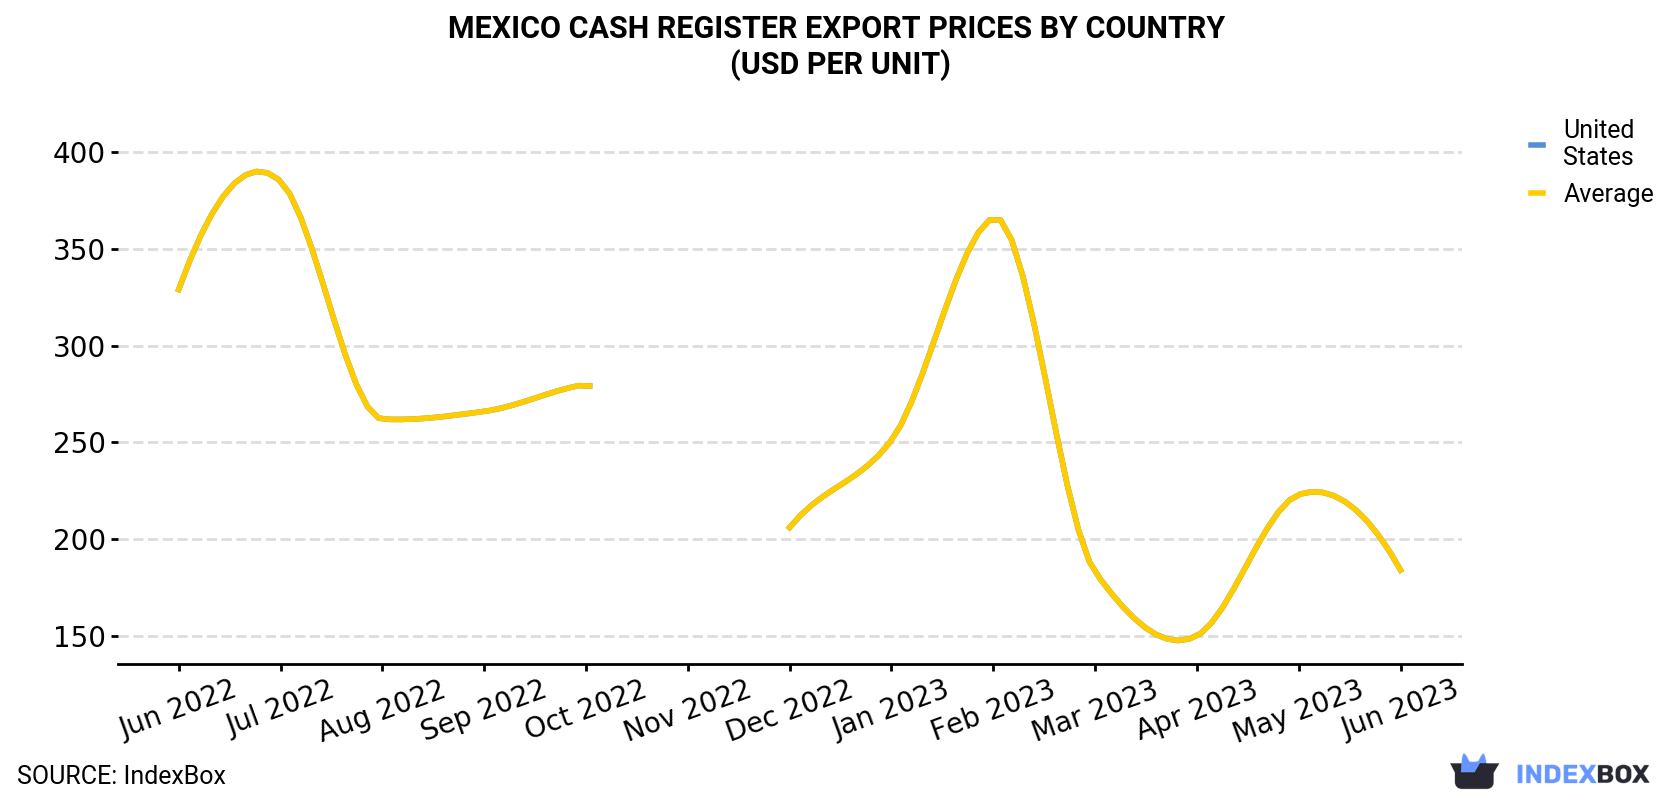 Mexico Cash Register Export Prices By Country (USD Per Unit)